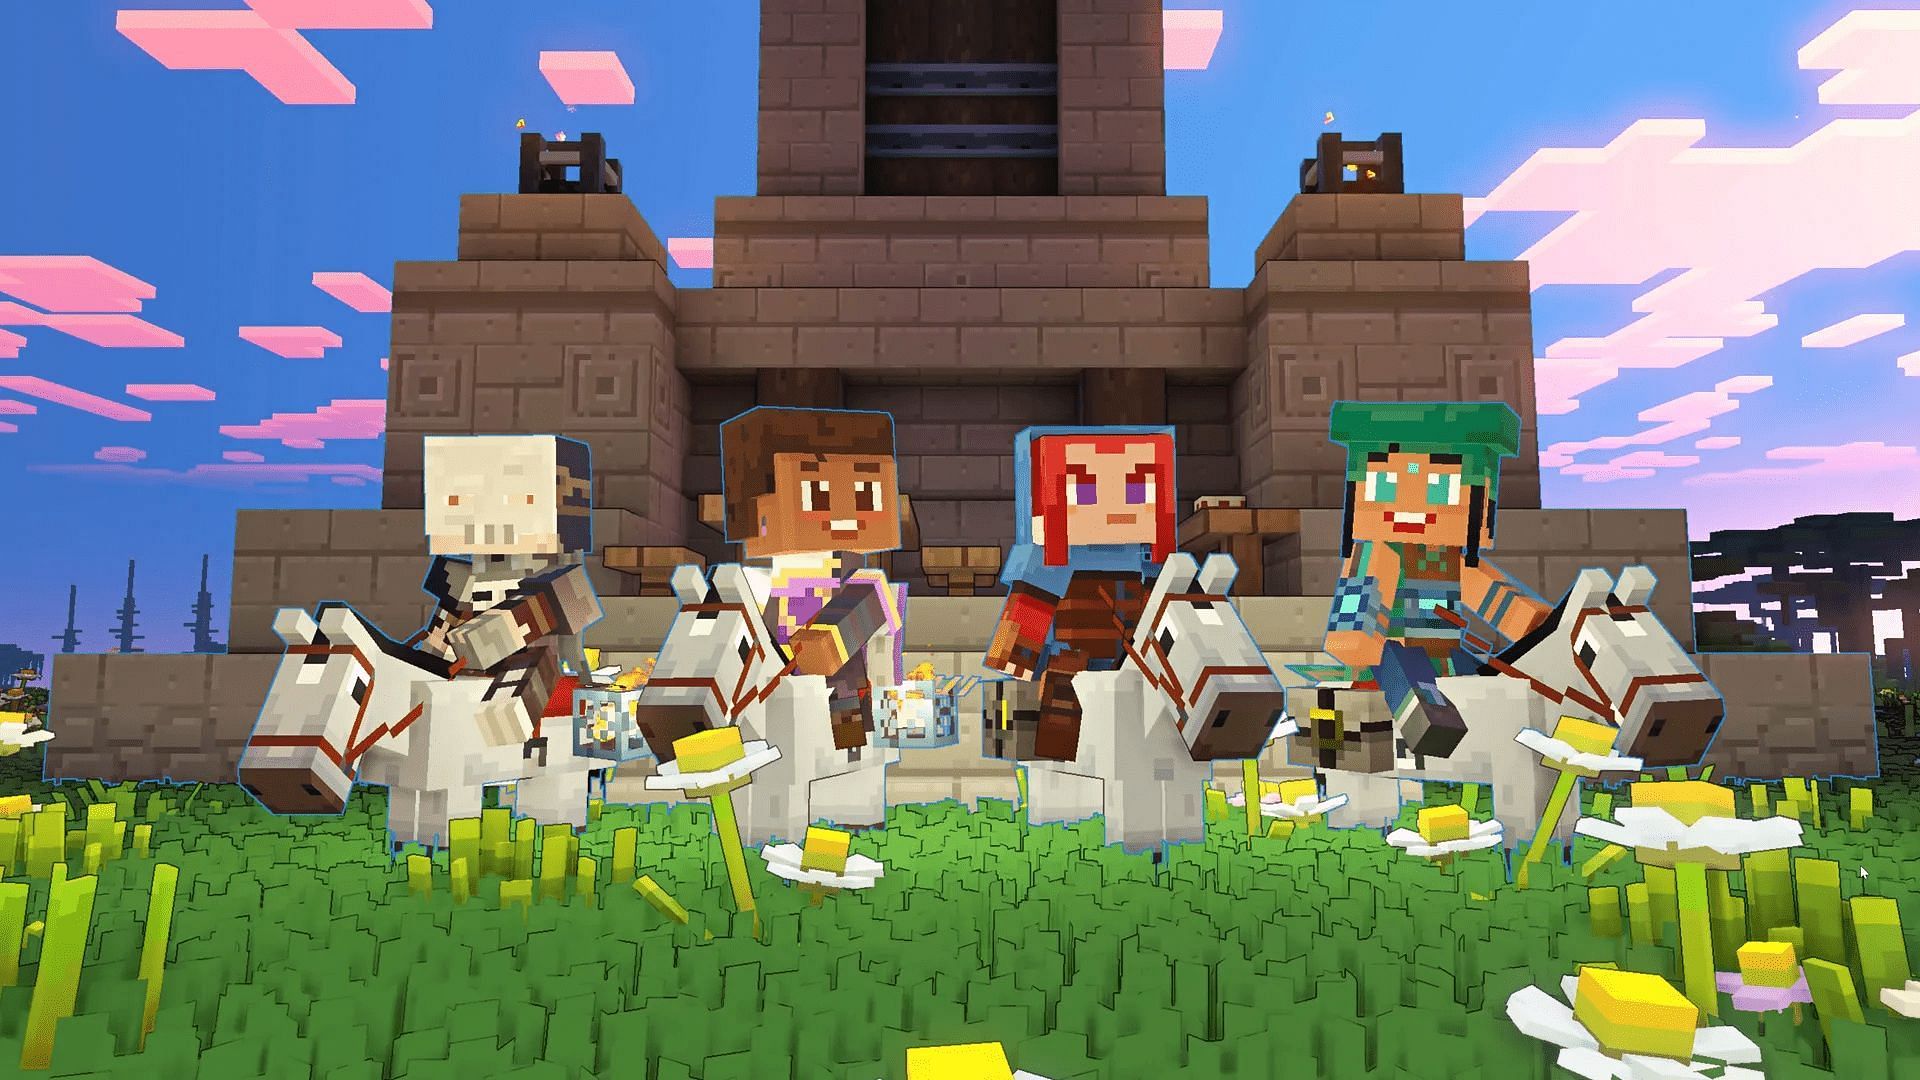 Players can band together or take each other on competitively in Minecraft Legends (Image via Mojang)